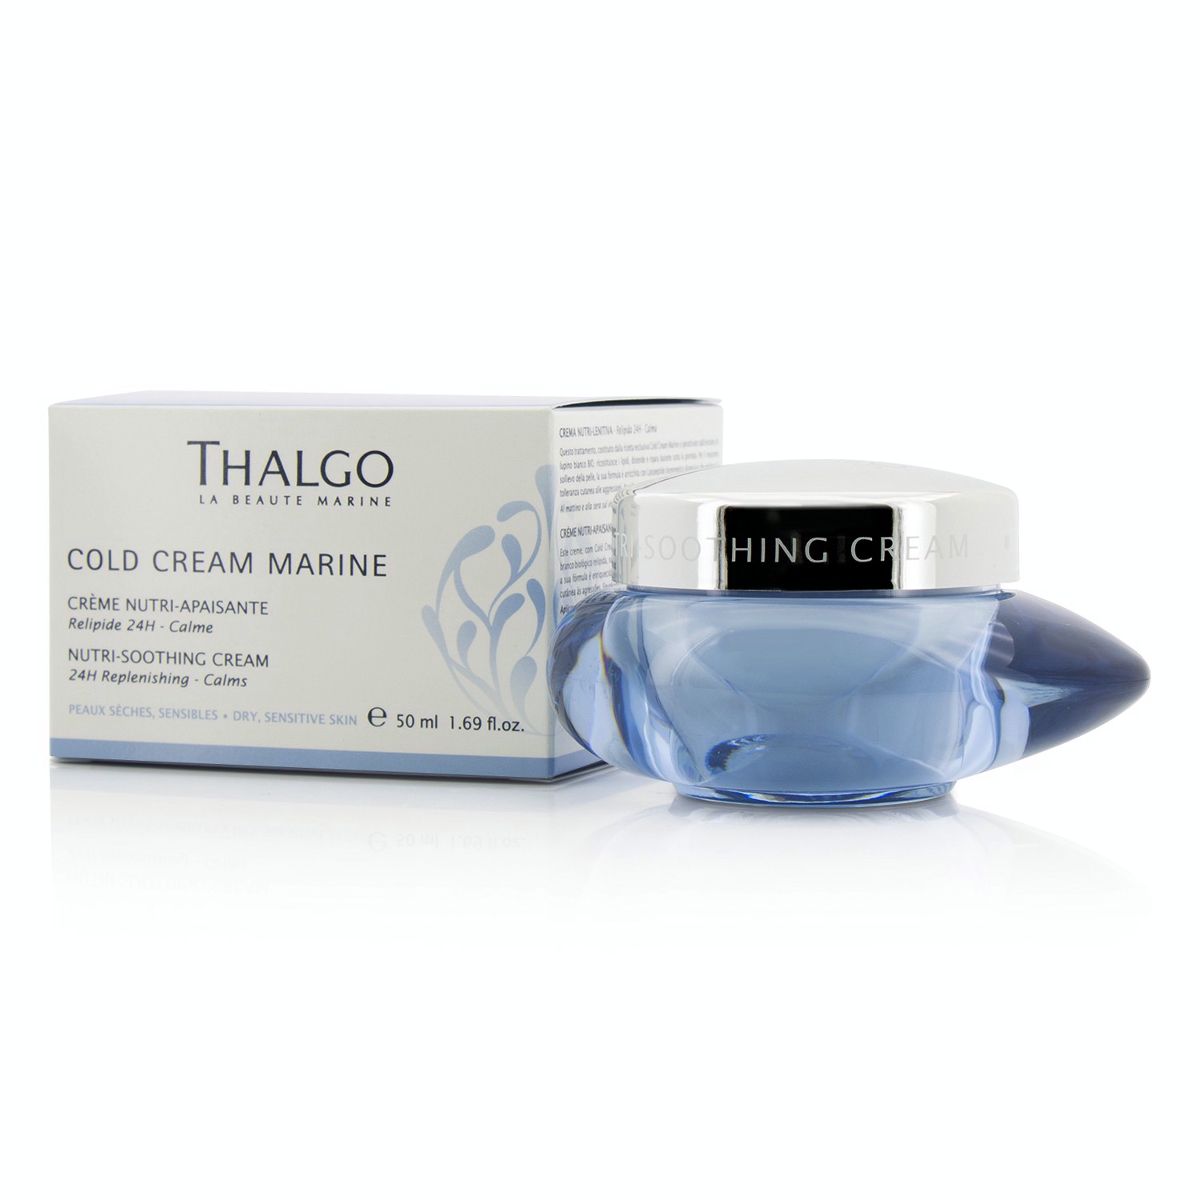 Cold Cream Marine Nutri-Soothing Cream - For Dry Sensitive Skin Thalgo Image